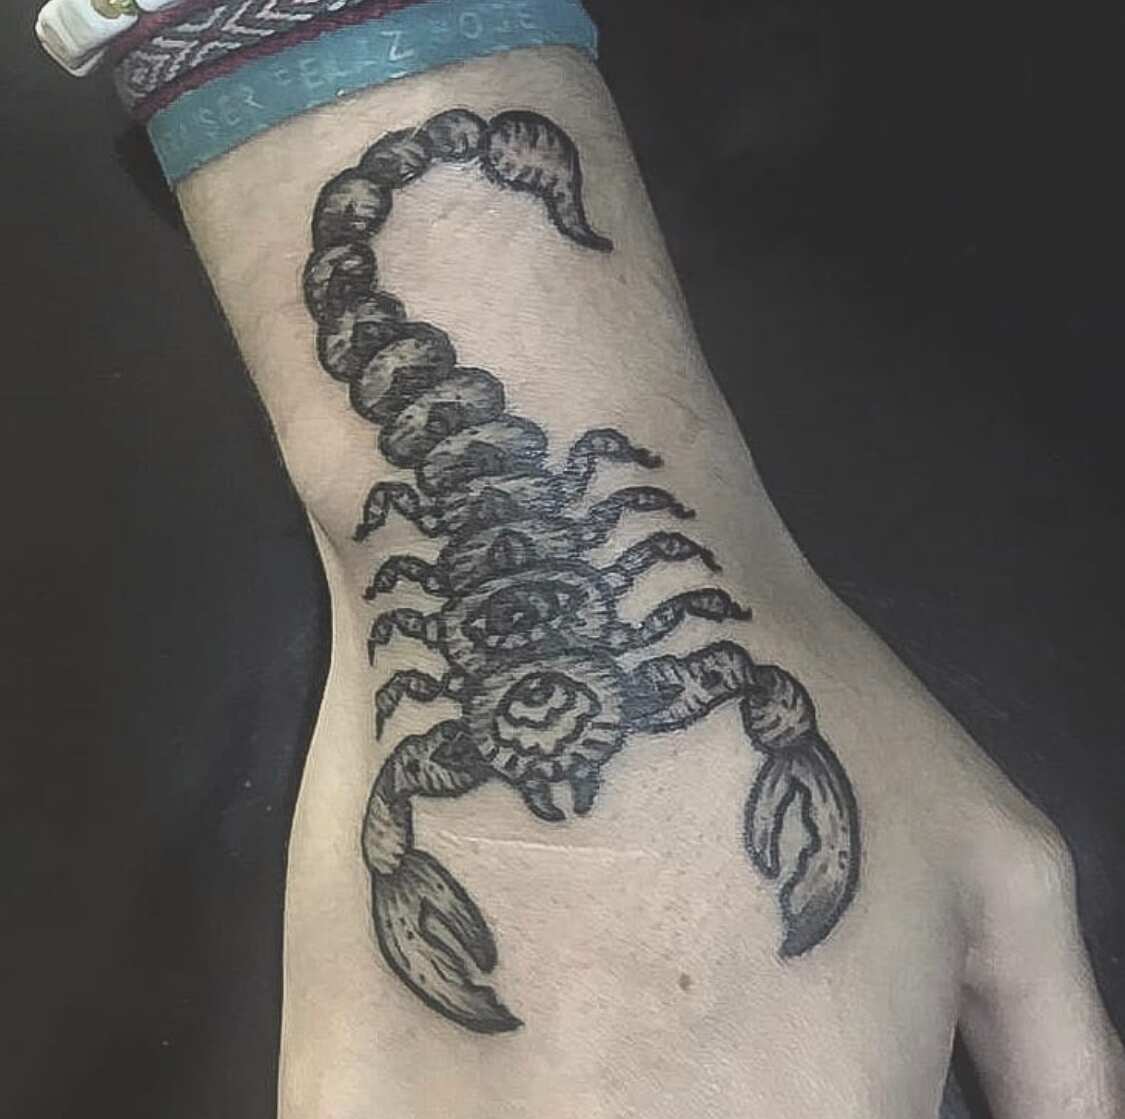 Scorpion tattoo located on the forearm, watercolor